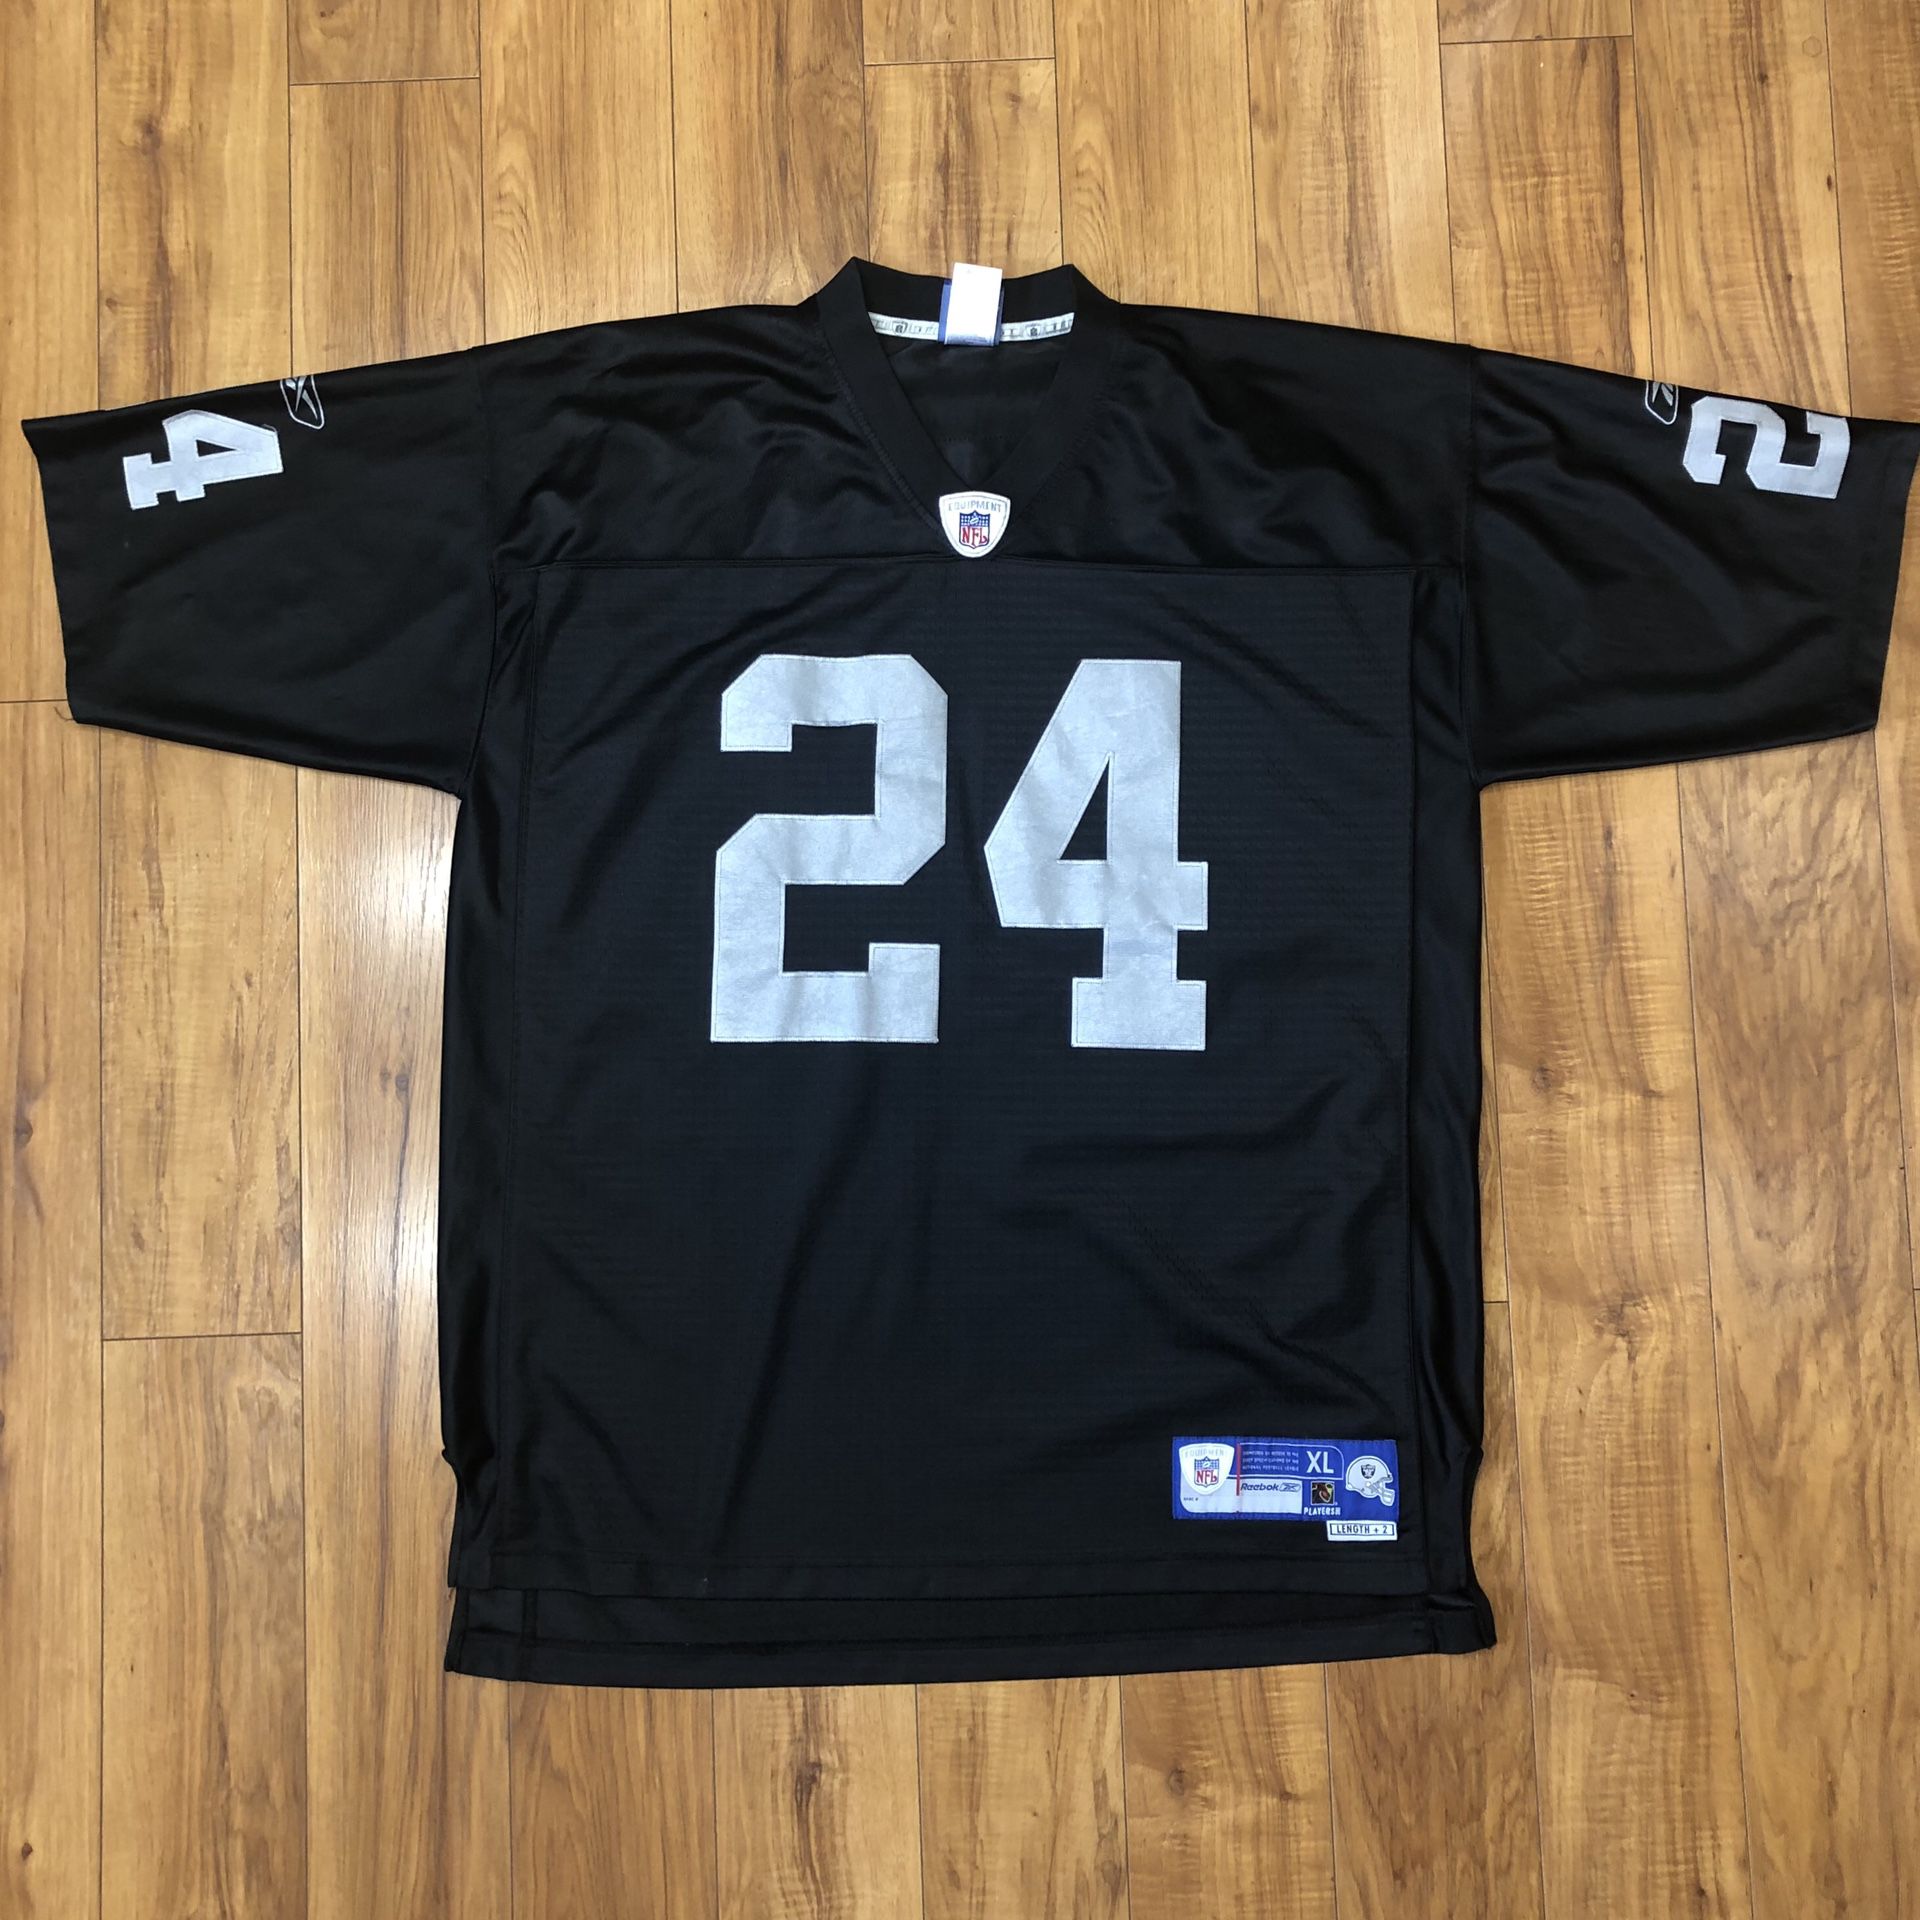 Reebok Michael Huff #24 OAKLAND RAIDERS NFL Football Jersey Men’s size XL Armpit to armpit measures 26 inches This is an awesome jersey and it’